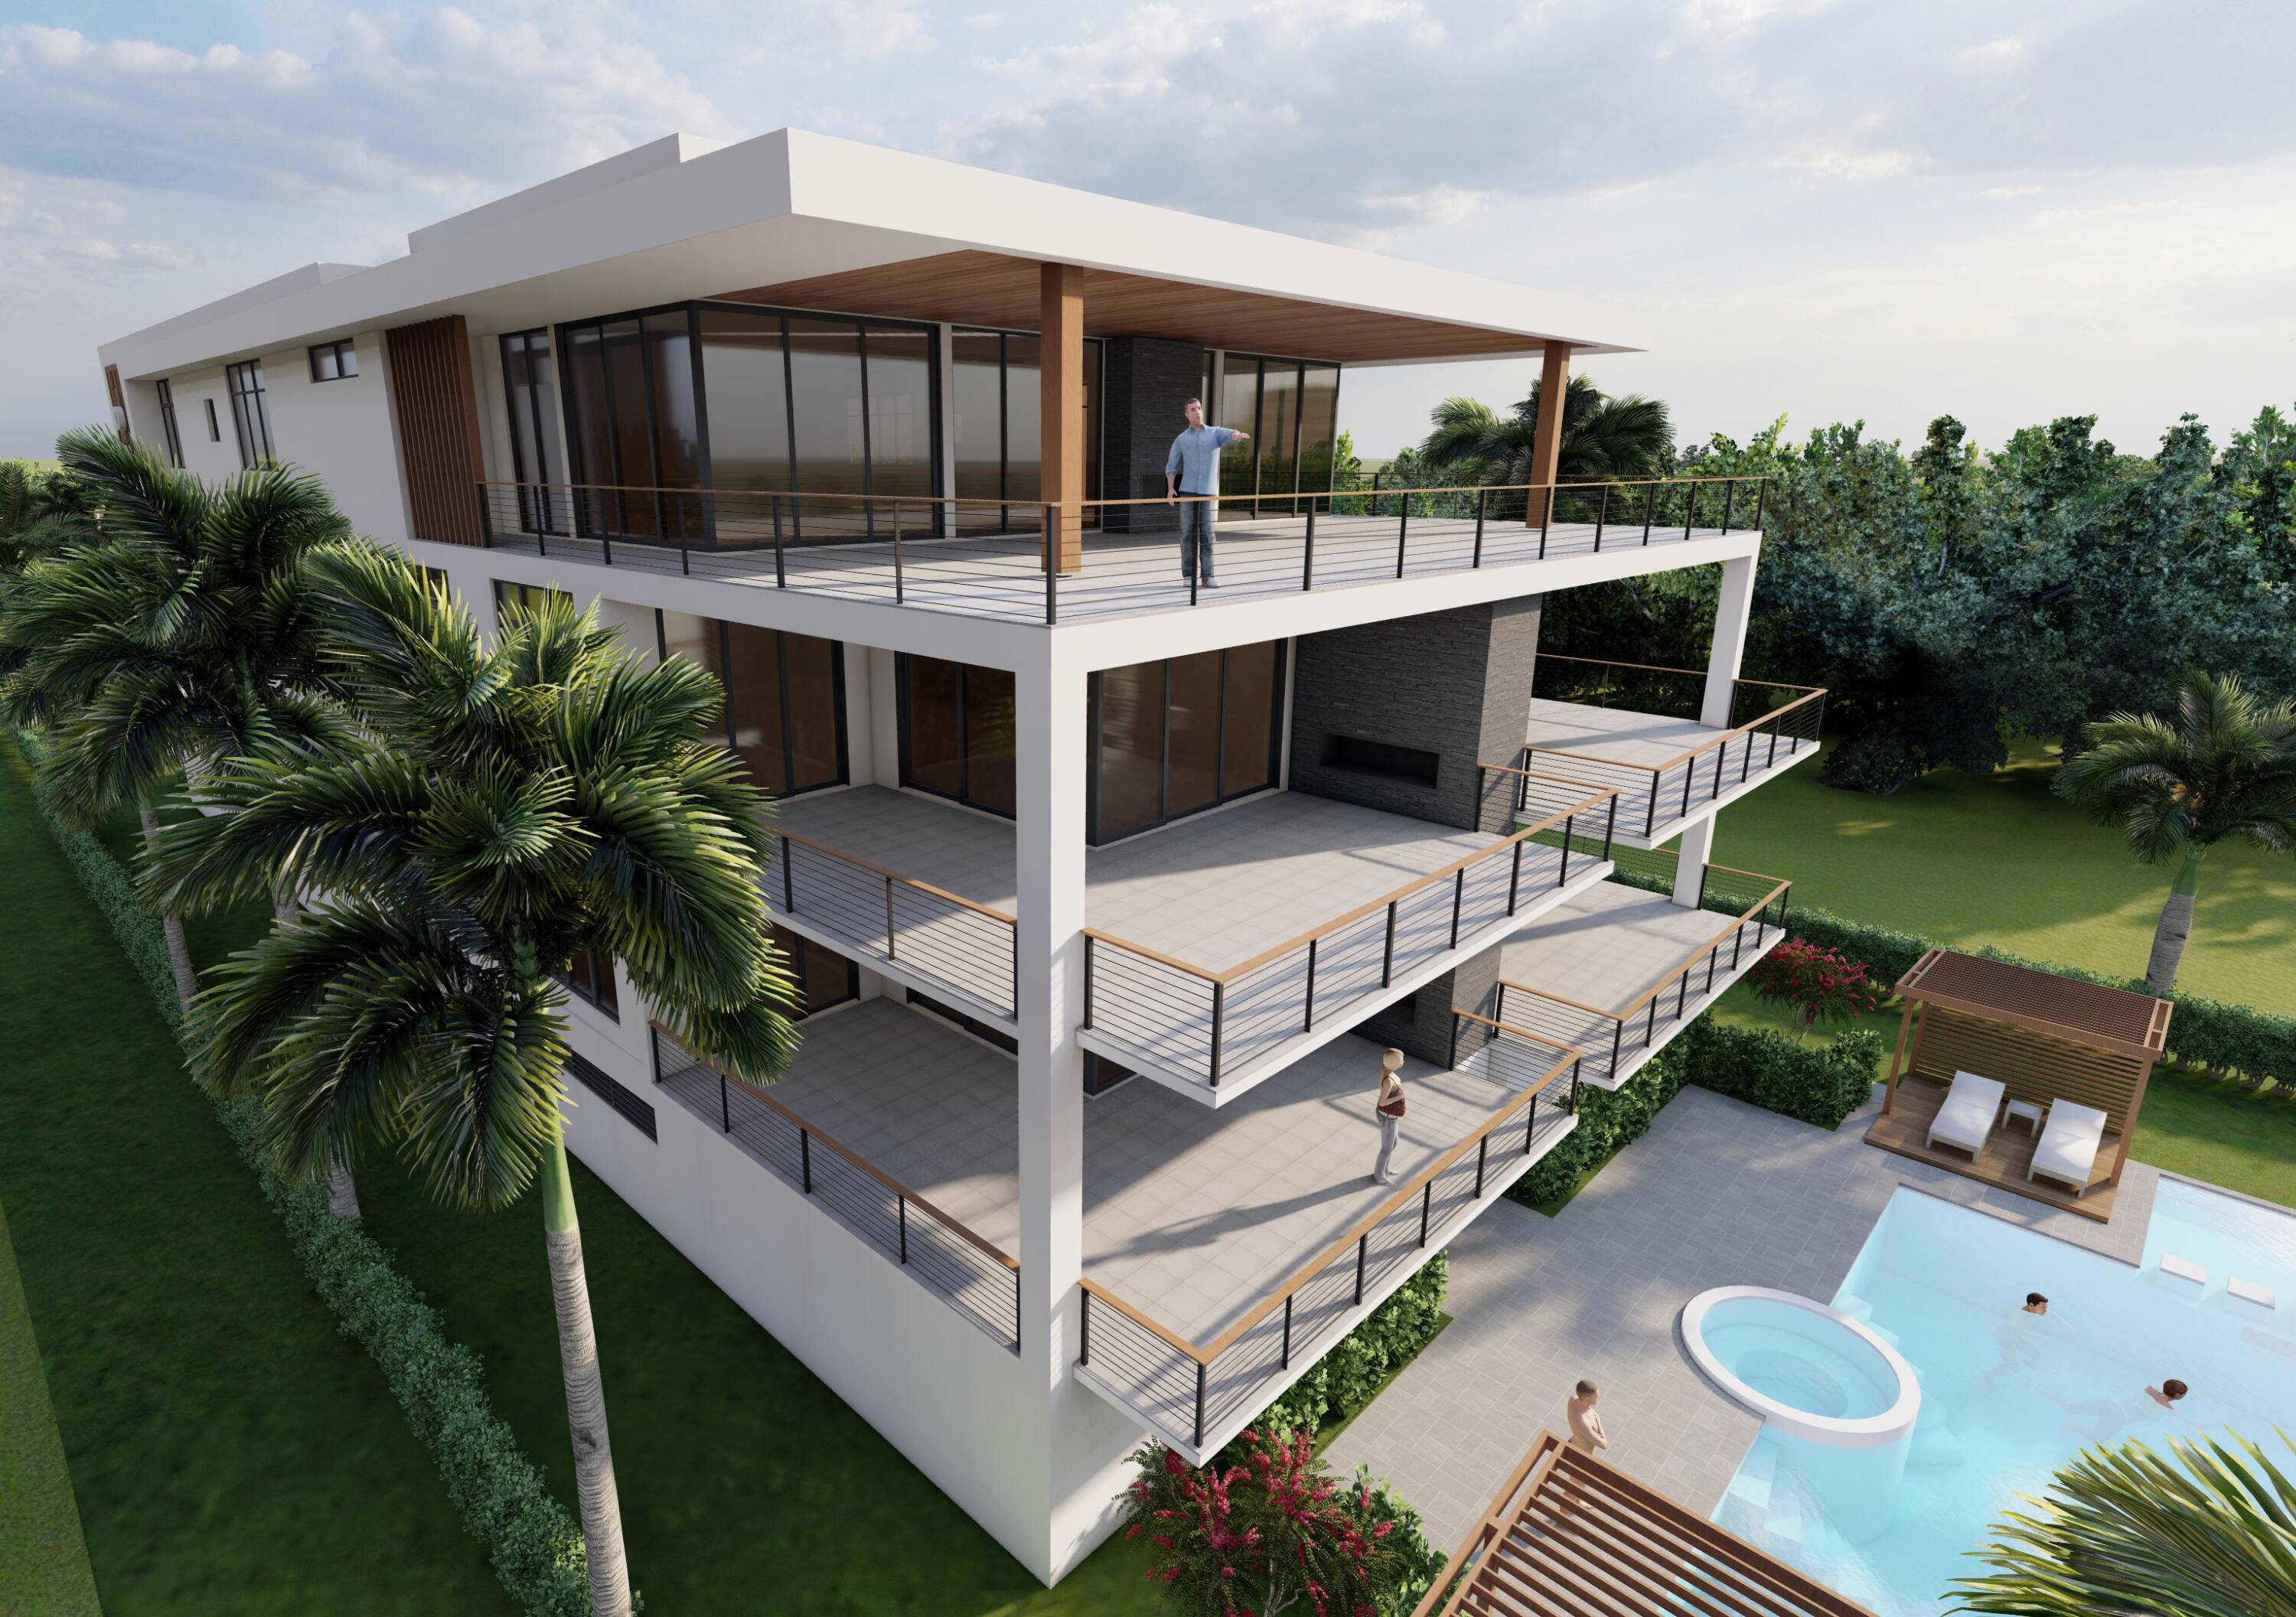 Whether you envision a family compound or a lucrative investment, The Driftwood Singer Island offers the perfect fusion of opulence and financial potential.